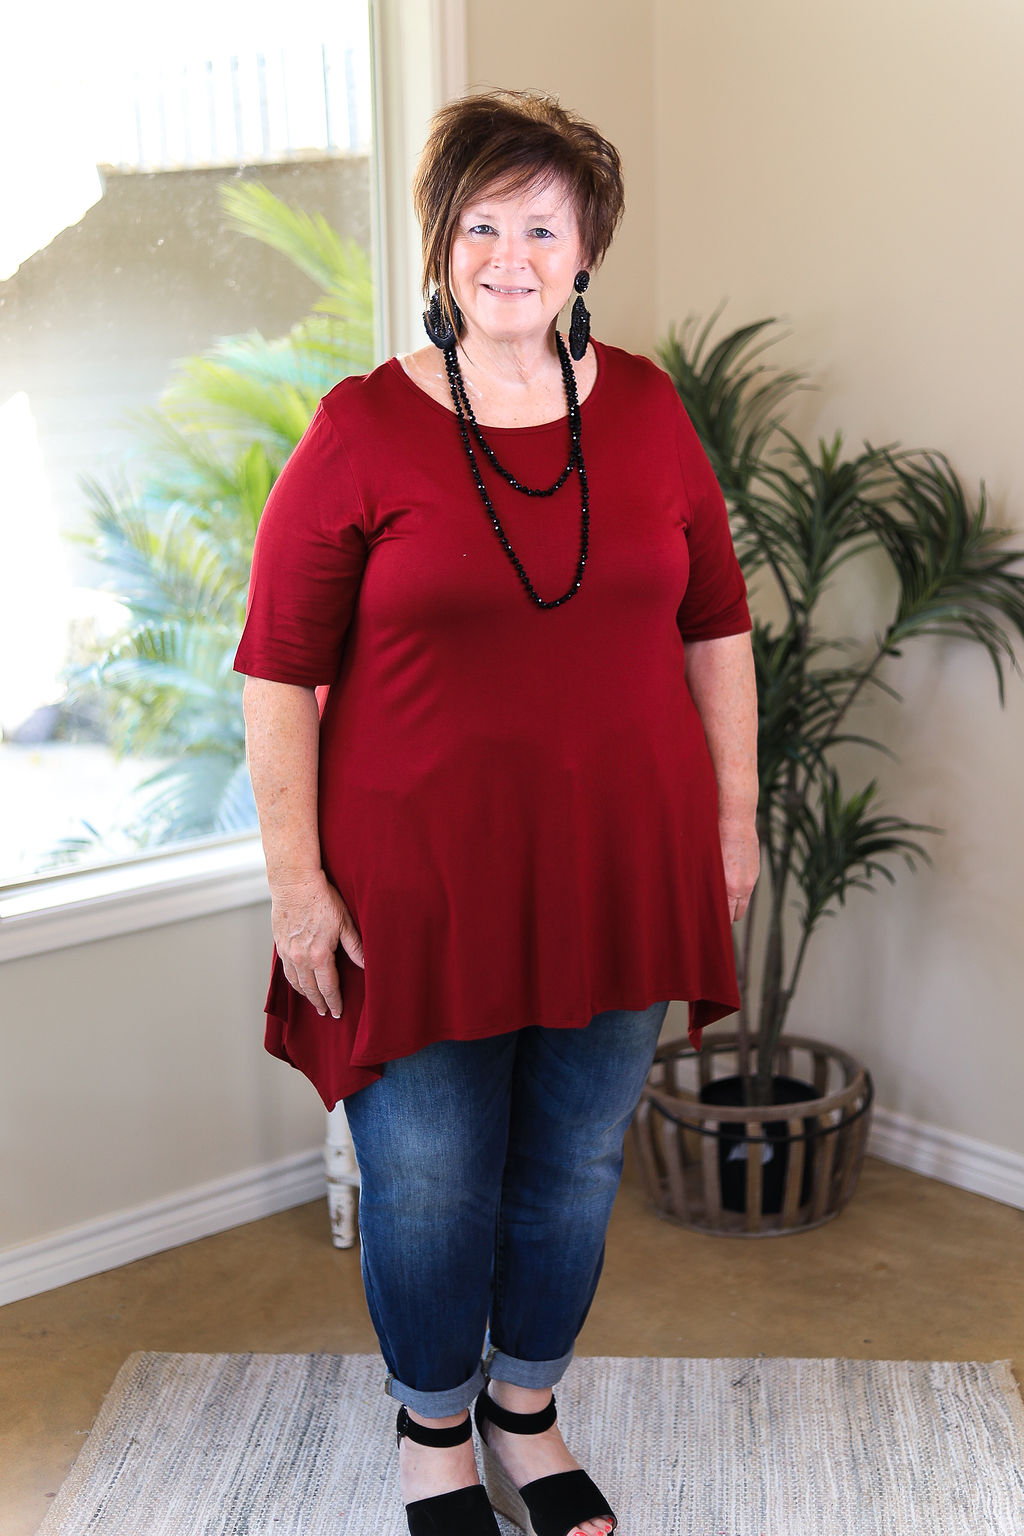 Whenever This Happens Solid Handkerchief Tunic Top in Maroon - Giddy Up Glamour Boutique